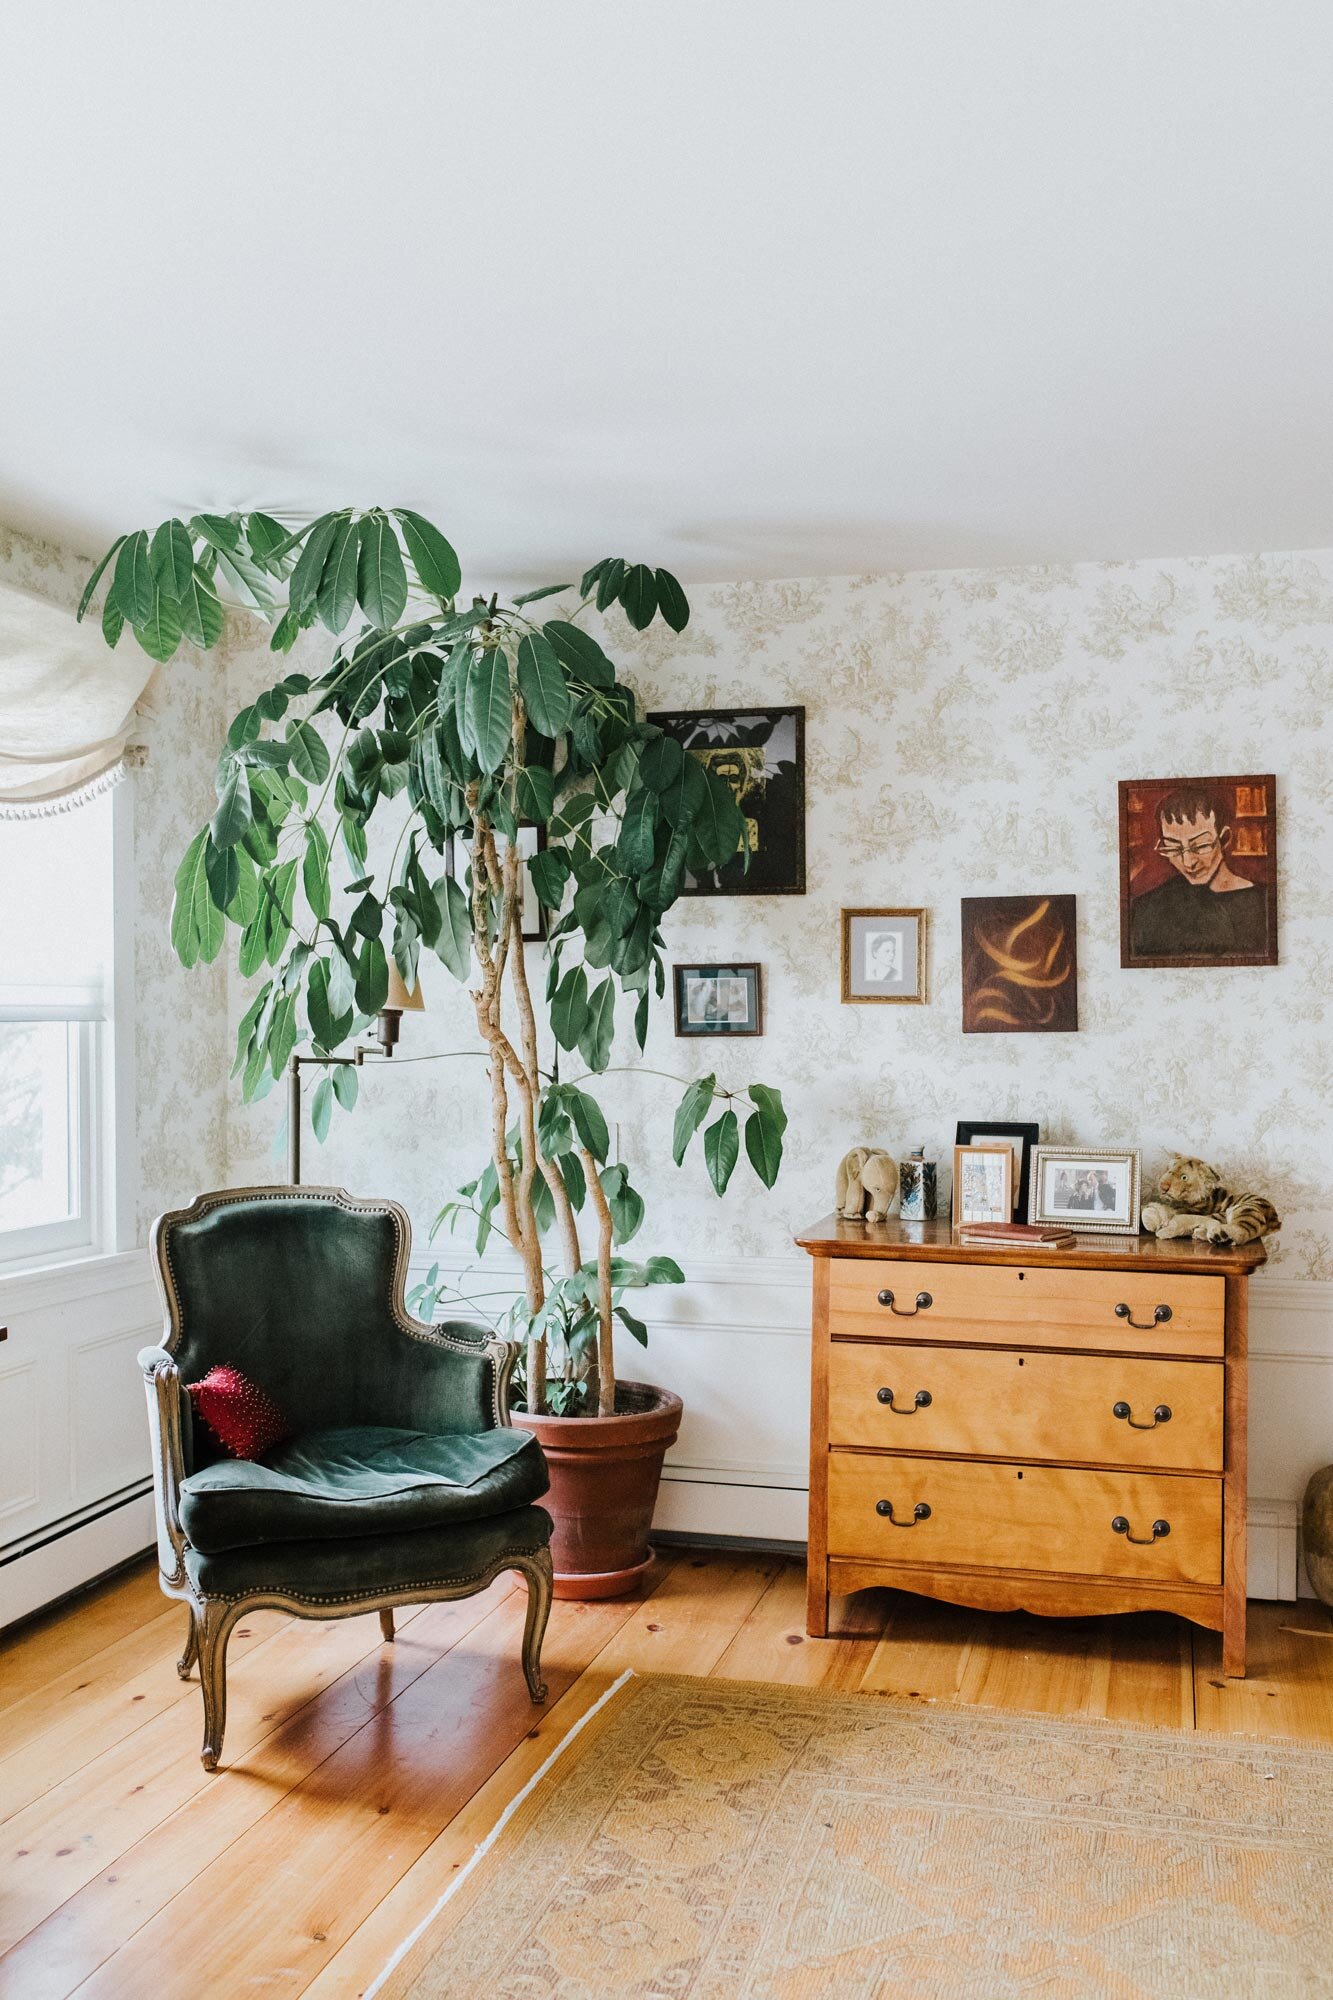  A California plant thrives in the guest bedroom alongside a green velvet chair and wooden dresser. 